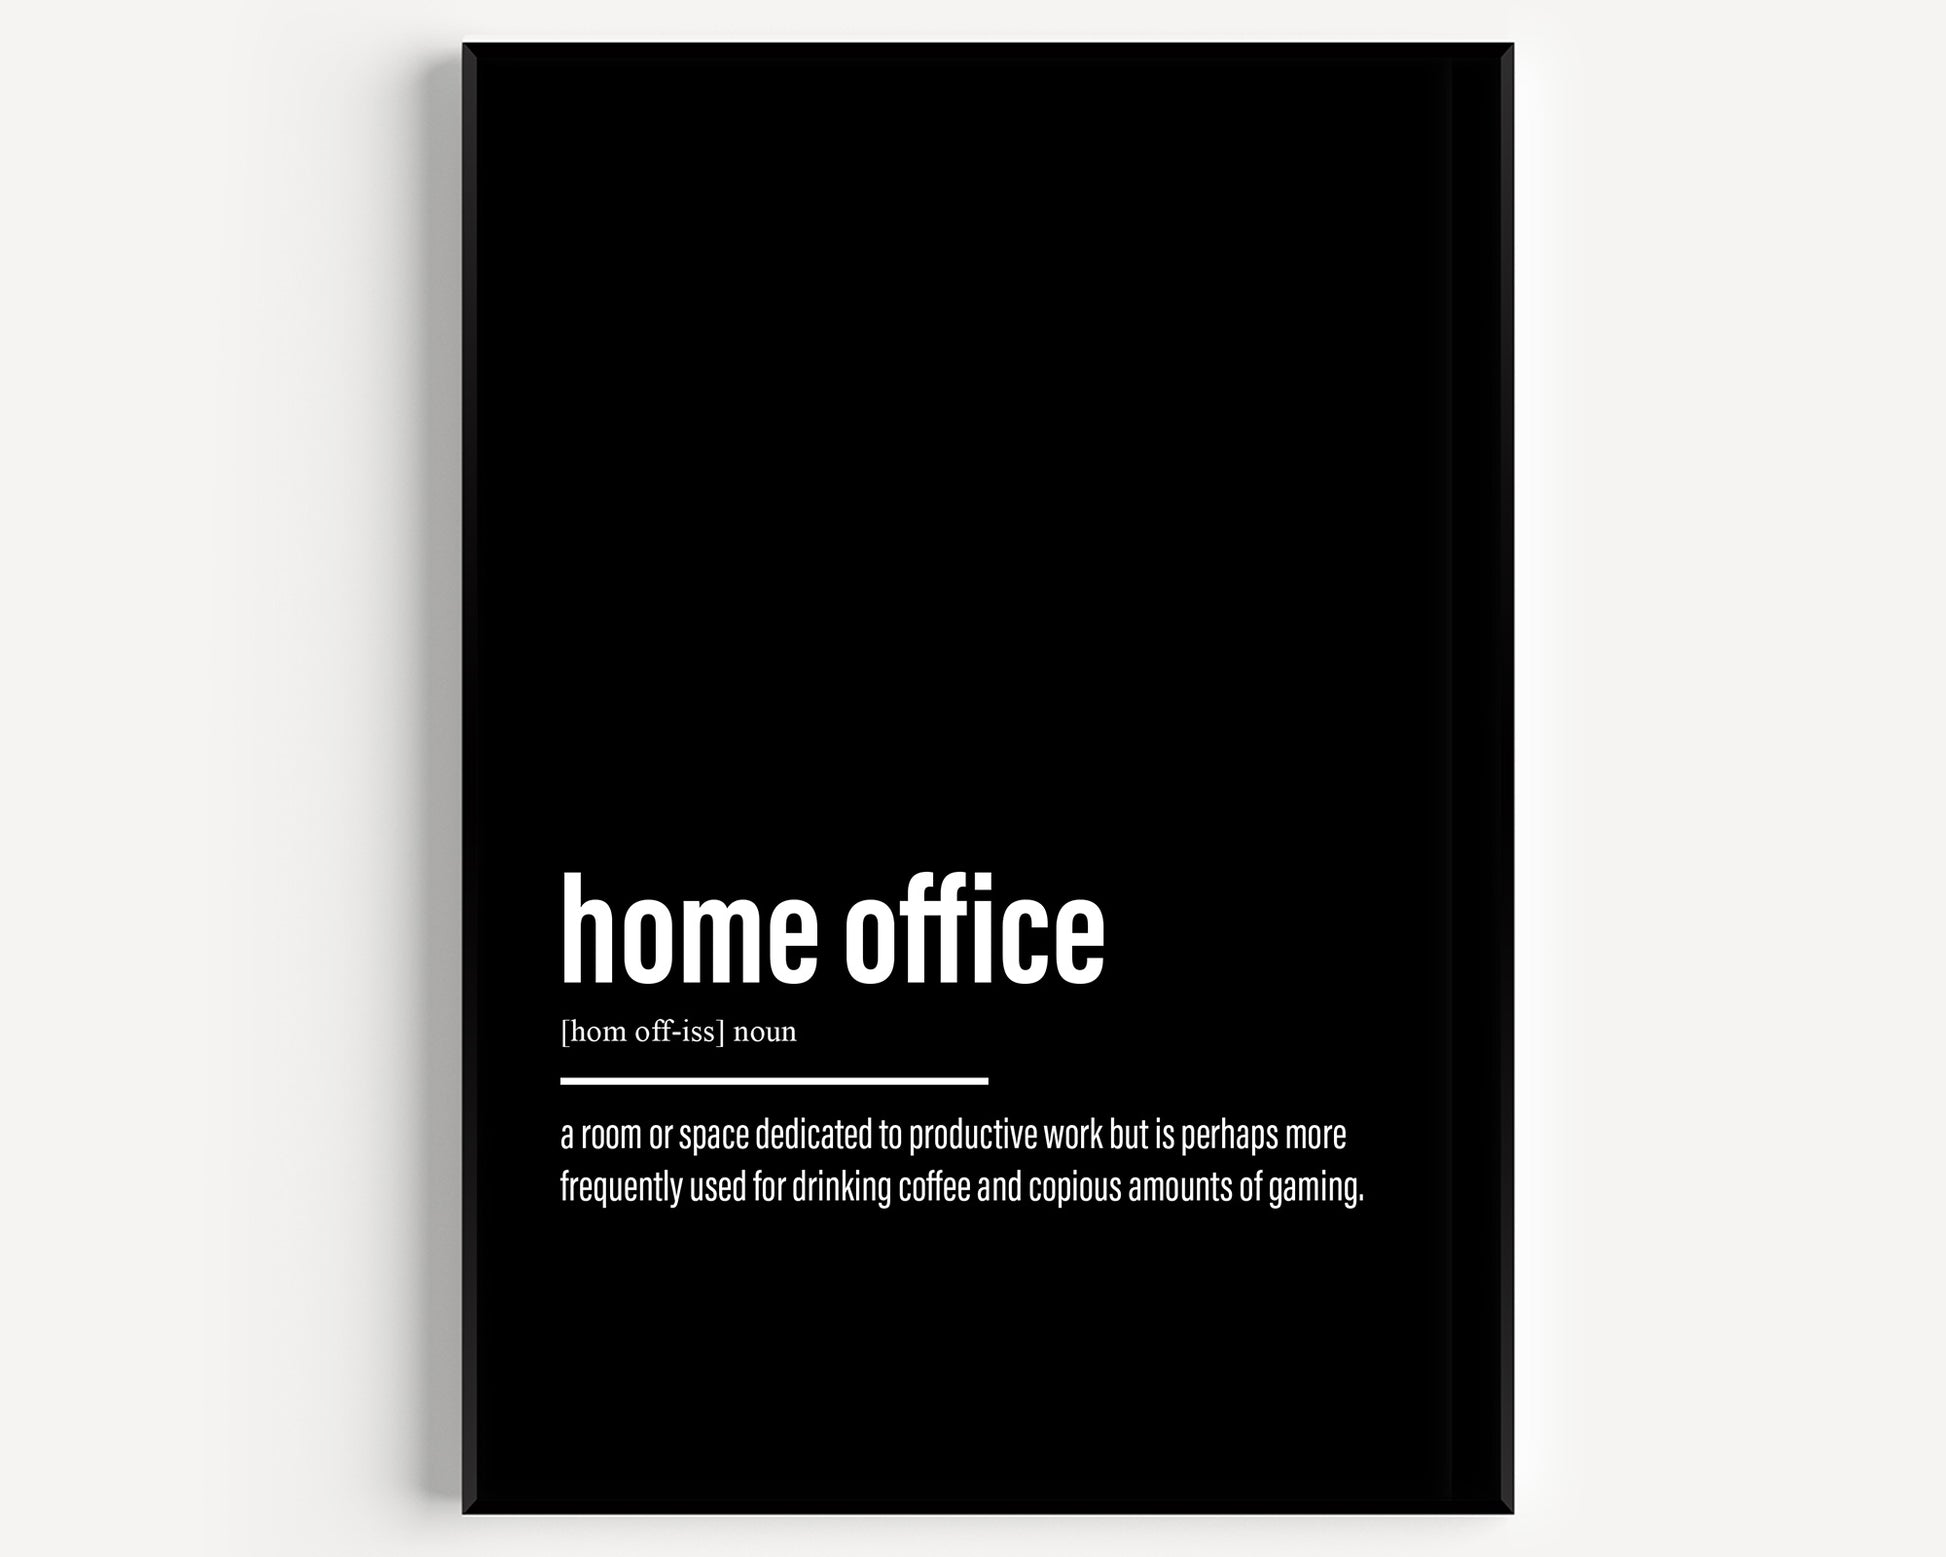 Home Office Definition Print - Magic Posters